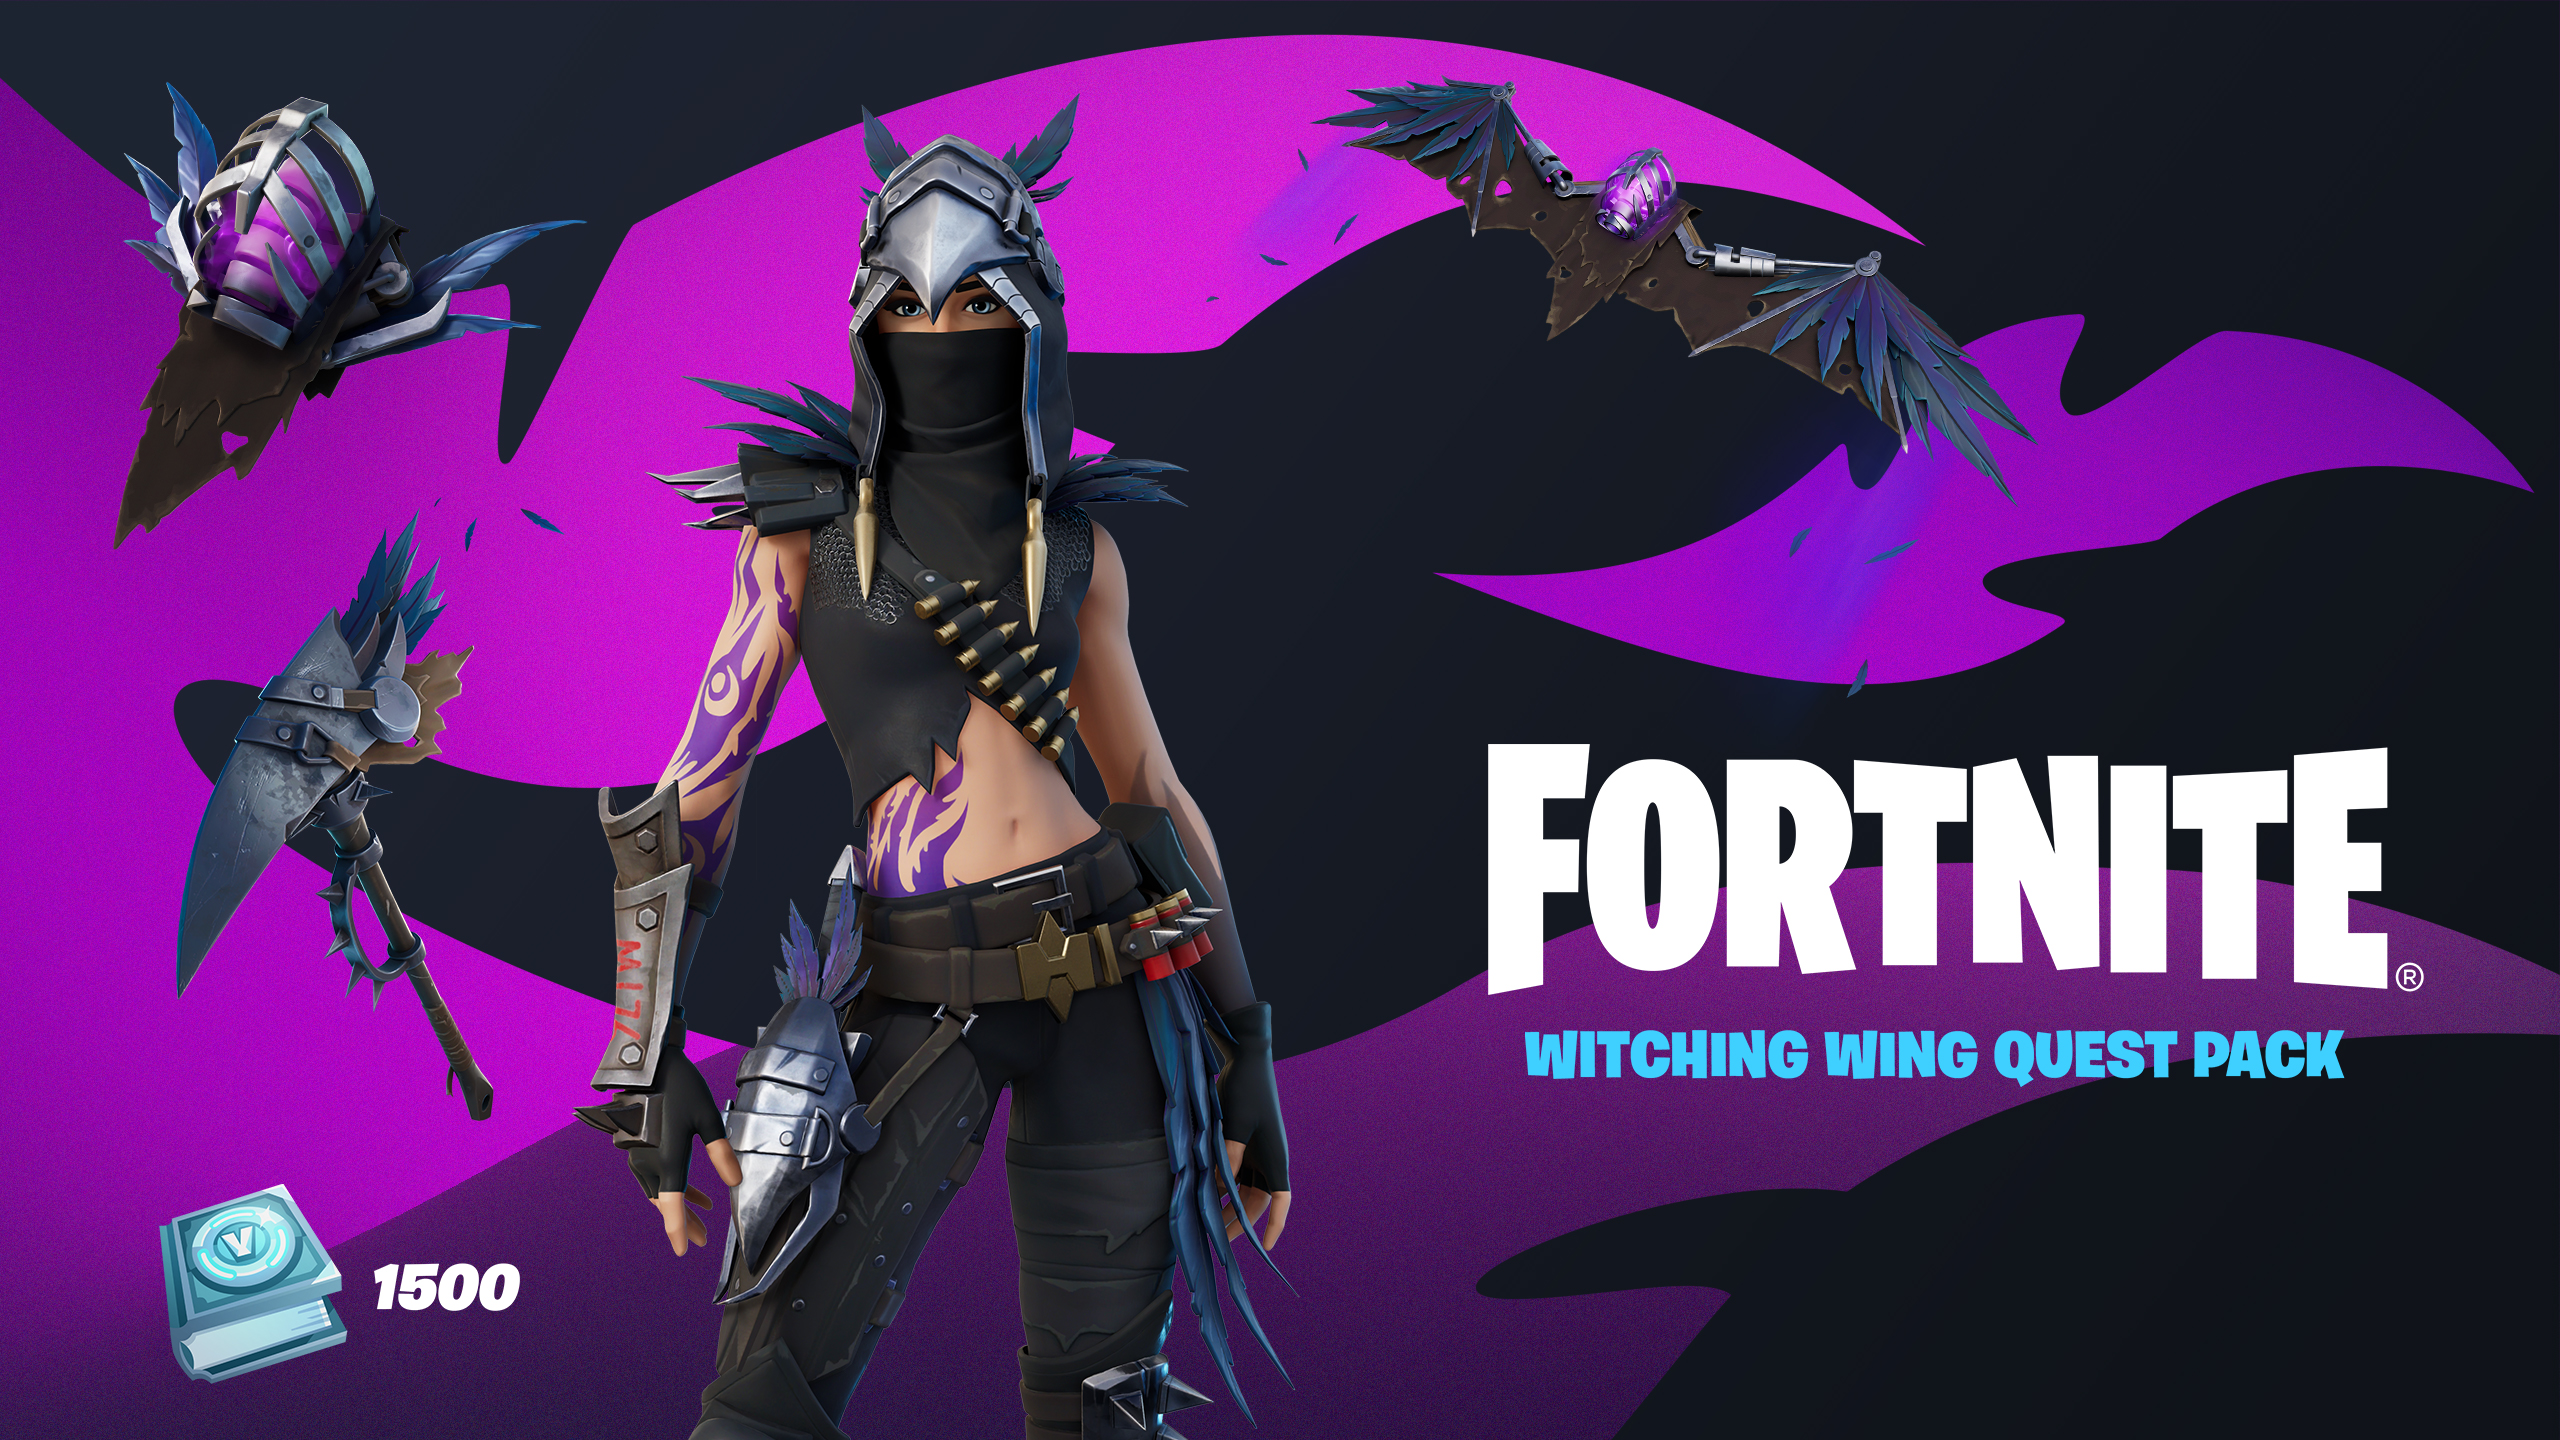 Fortnite - Witching Wing Quest Pack EU XBOX One / Xbox Series X|S CD Key, 154.8 usd